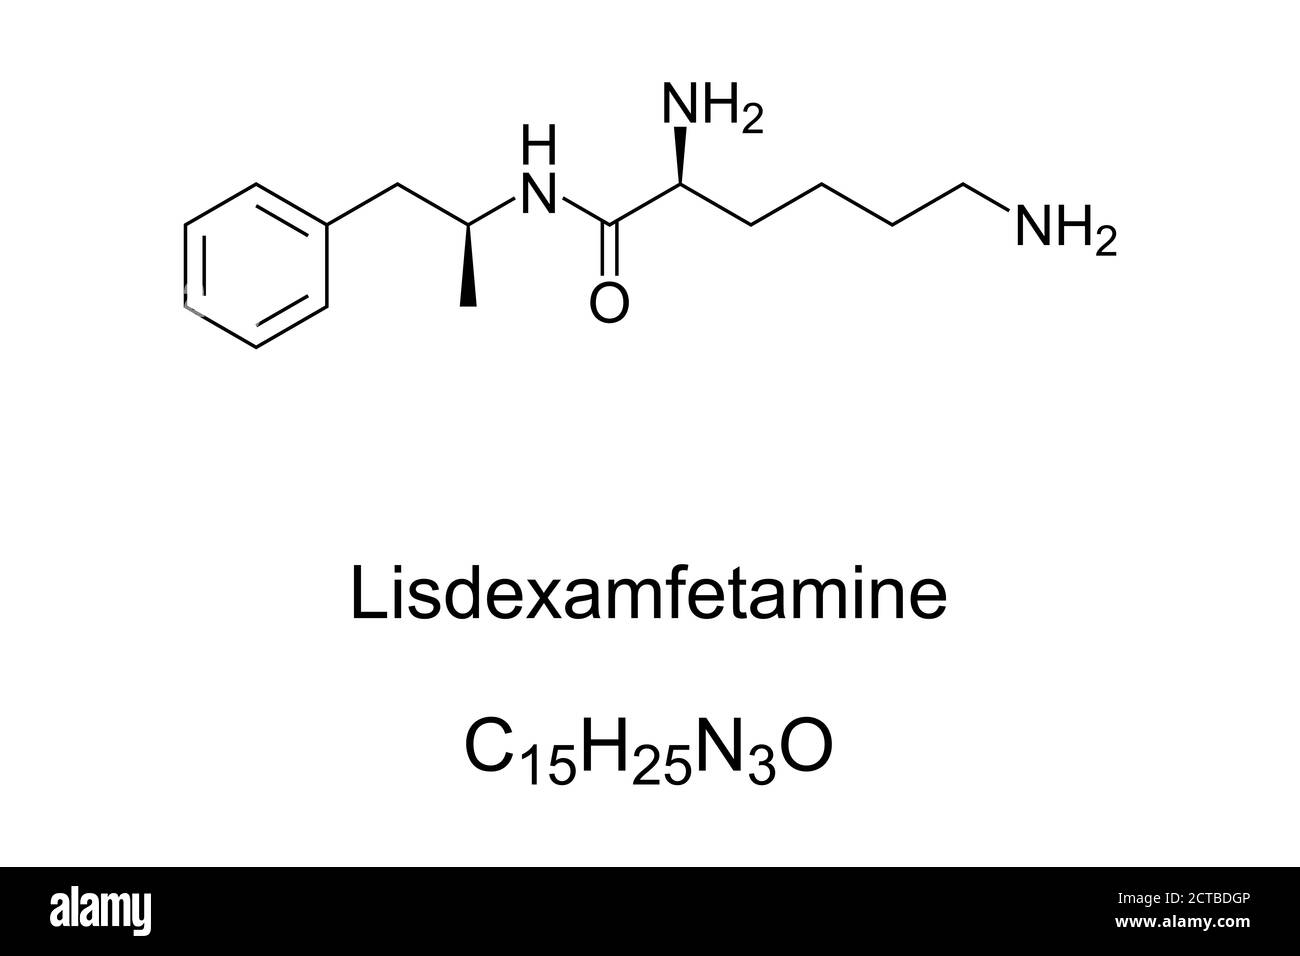 Lisdexamfetamine, chemical structure. A medication and derivative of amphetamine. A central nervous system stimulant, used in the treatment of ADHD. Stock Photo